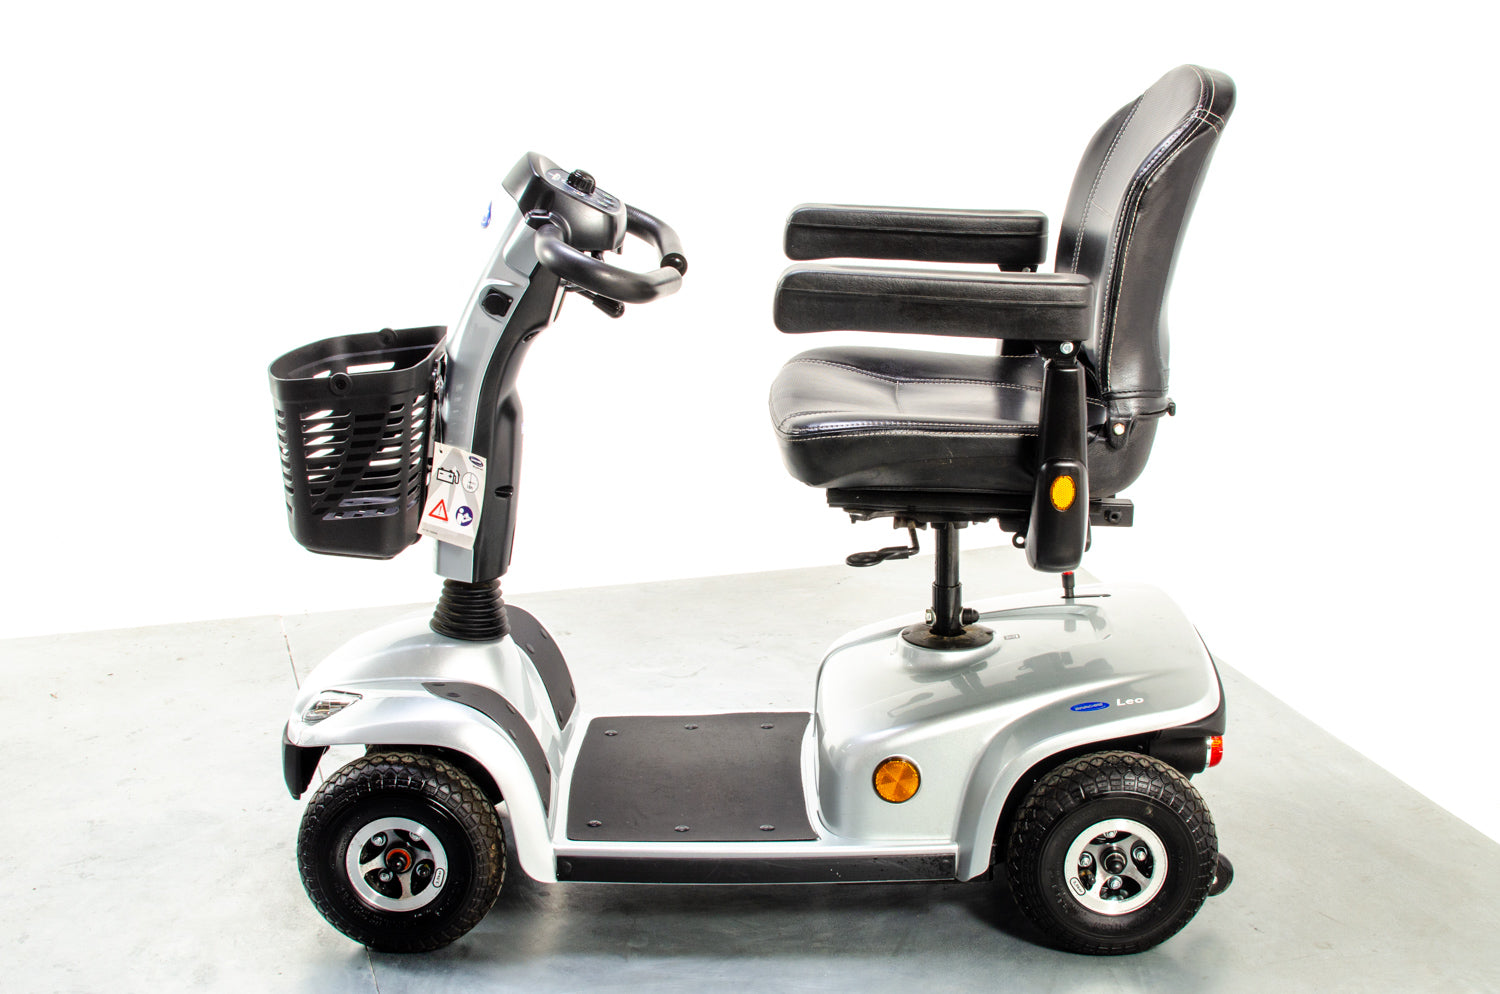 Invacare Leo Used Mobility Scooter Pavement Comfy Pneumatic Tyres